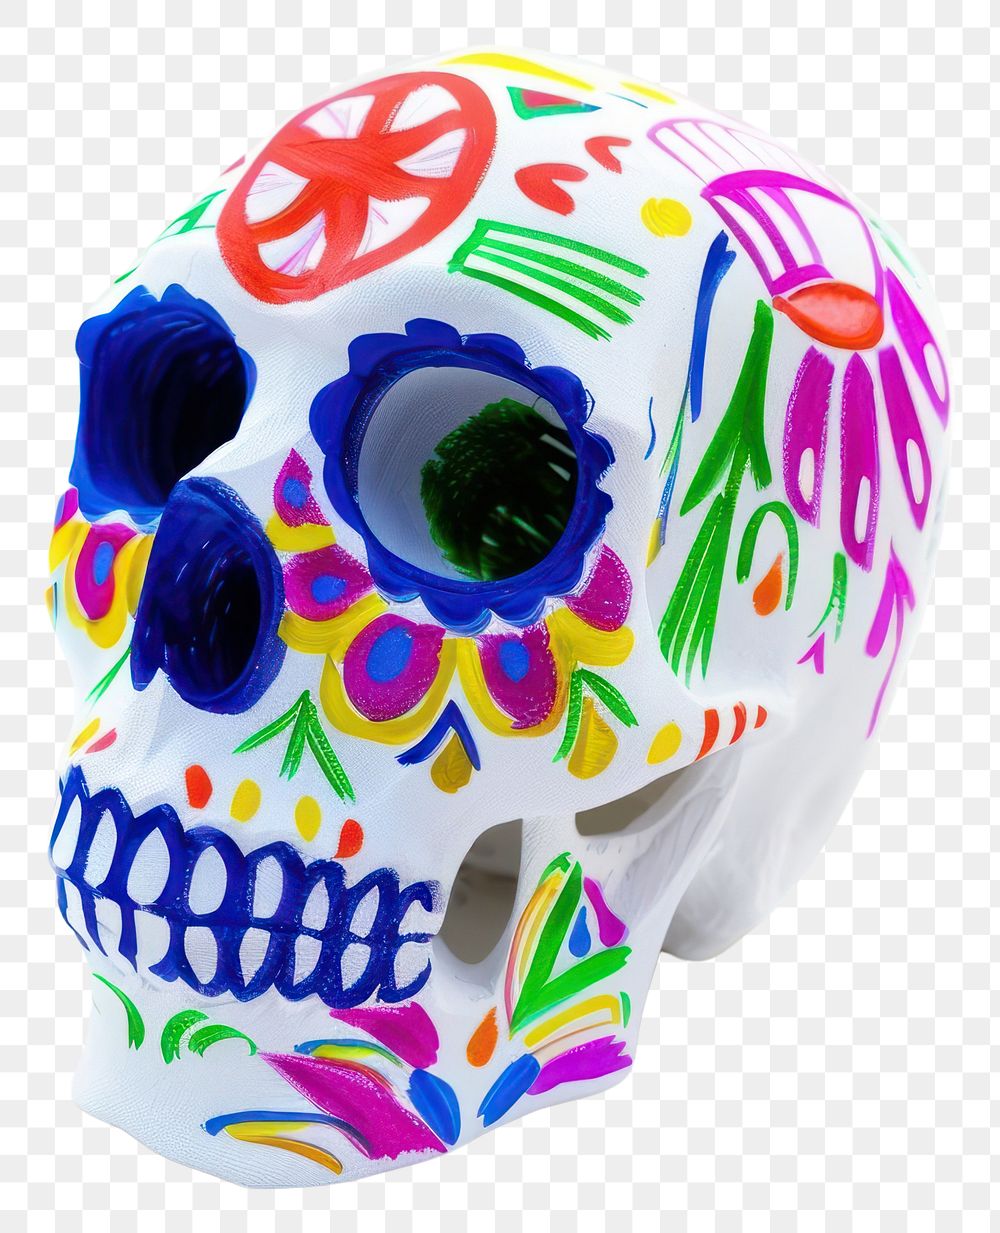 PNG Mexican style skull dessert cream creme.